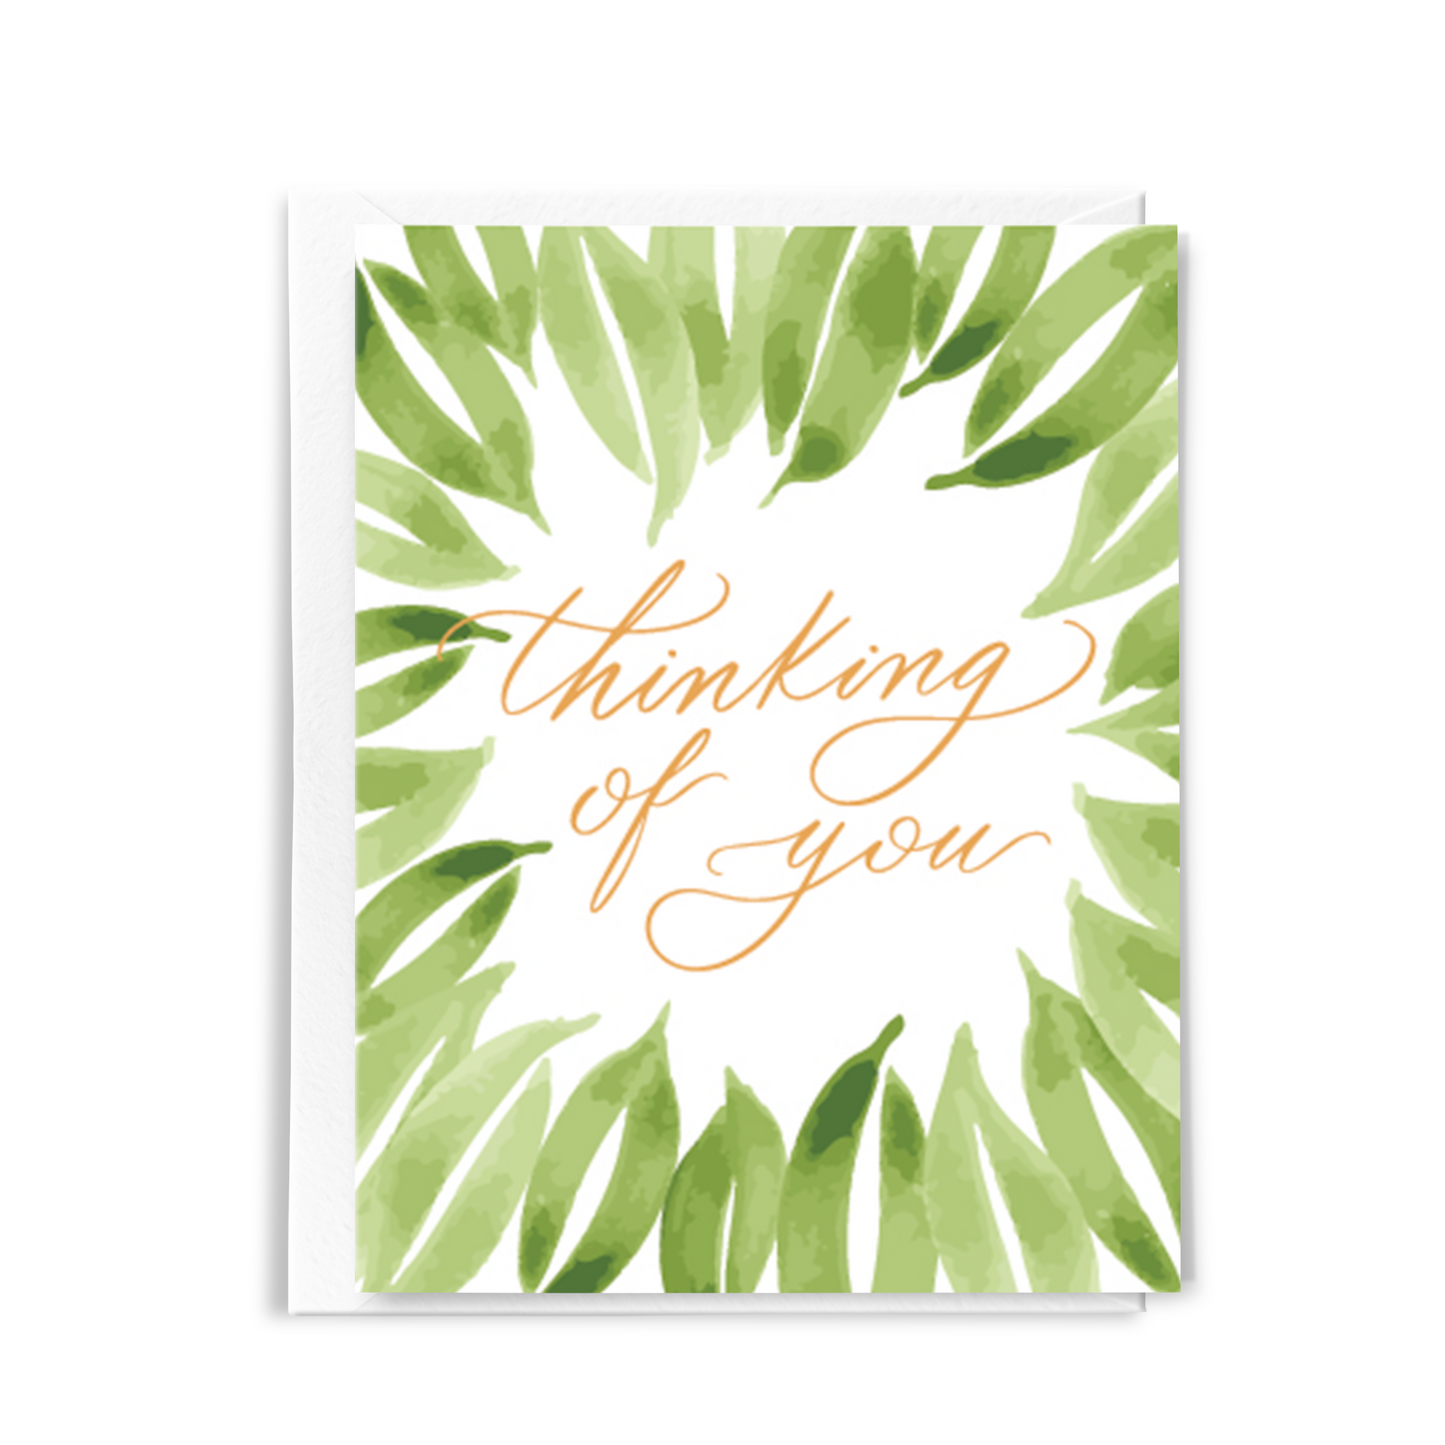 Watercolor Thoughtful Card - Thinking of You Card